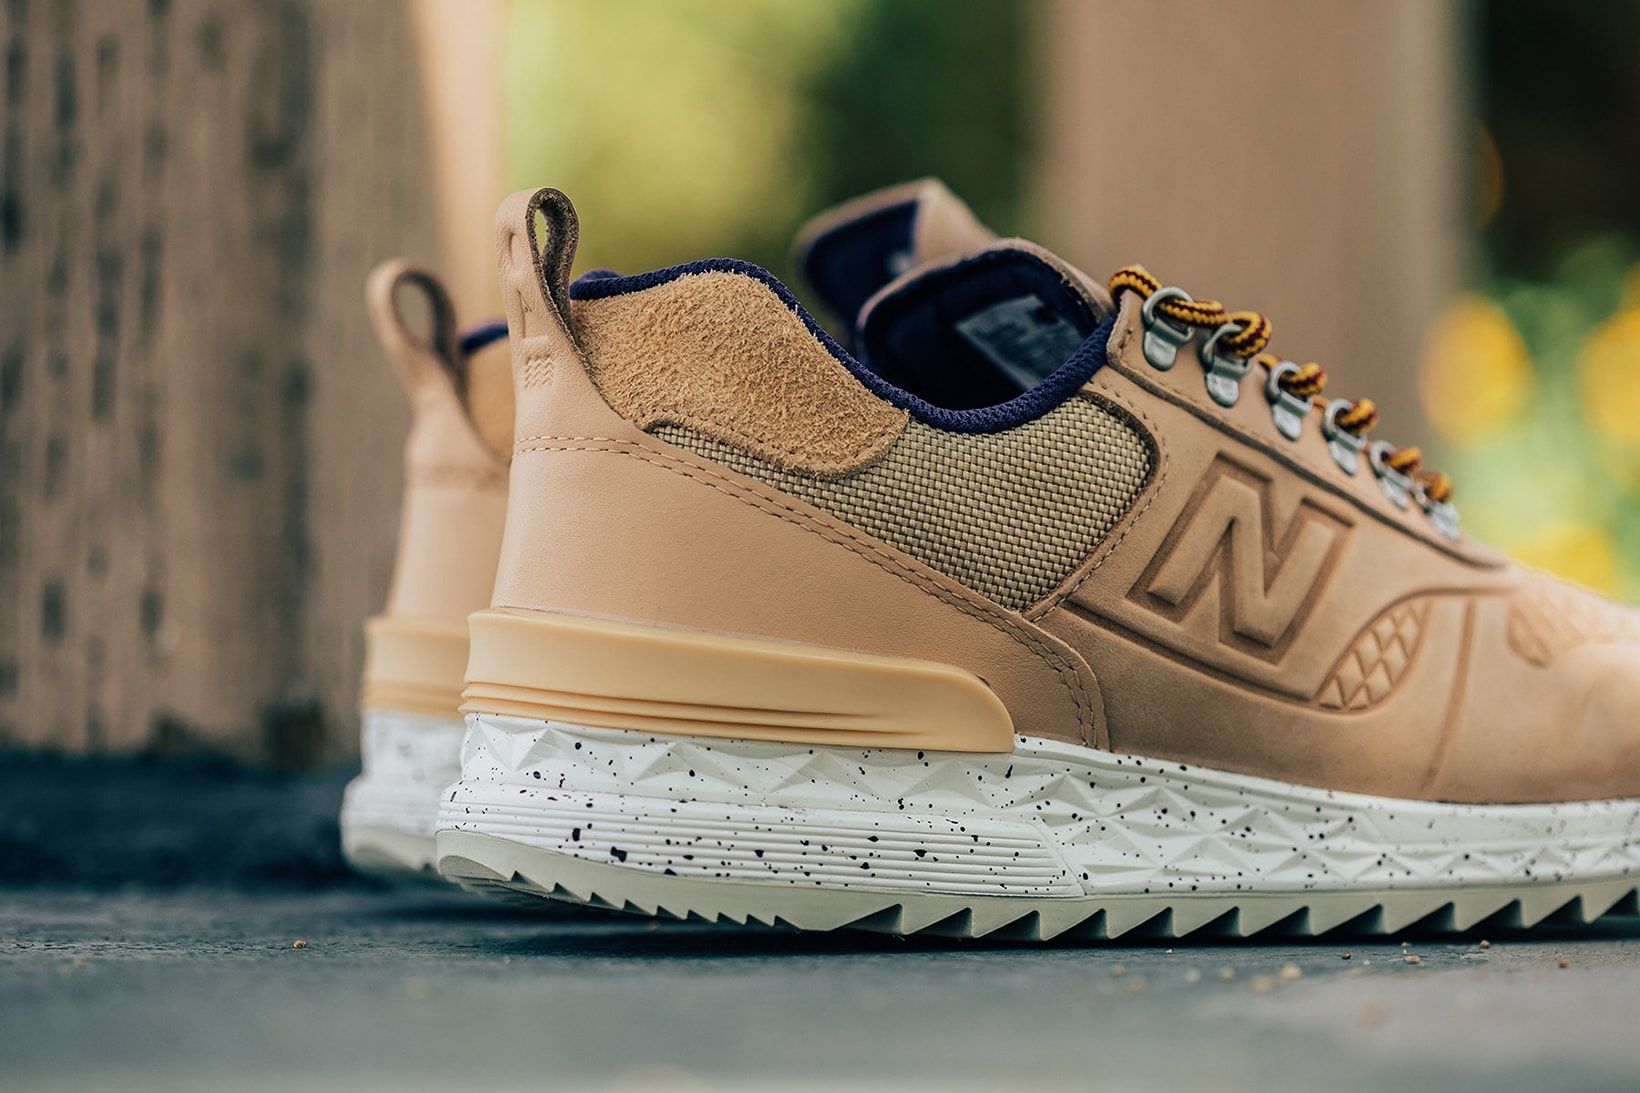 New Balance Trailbuster Dune Sneakers Shoes Footwear Feature